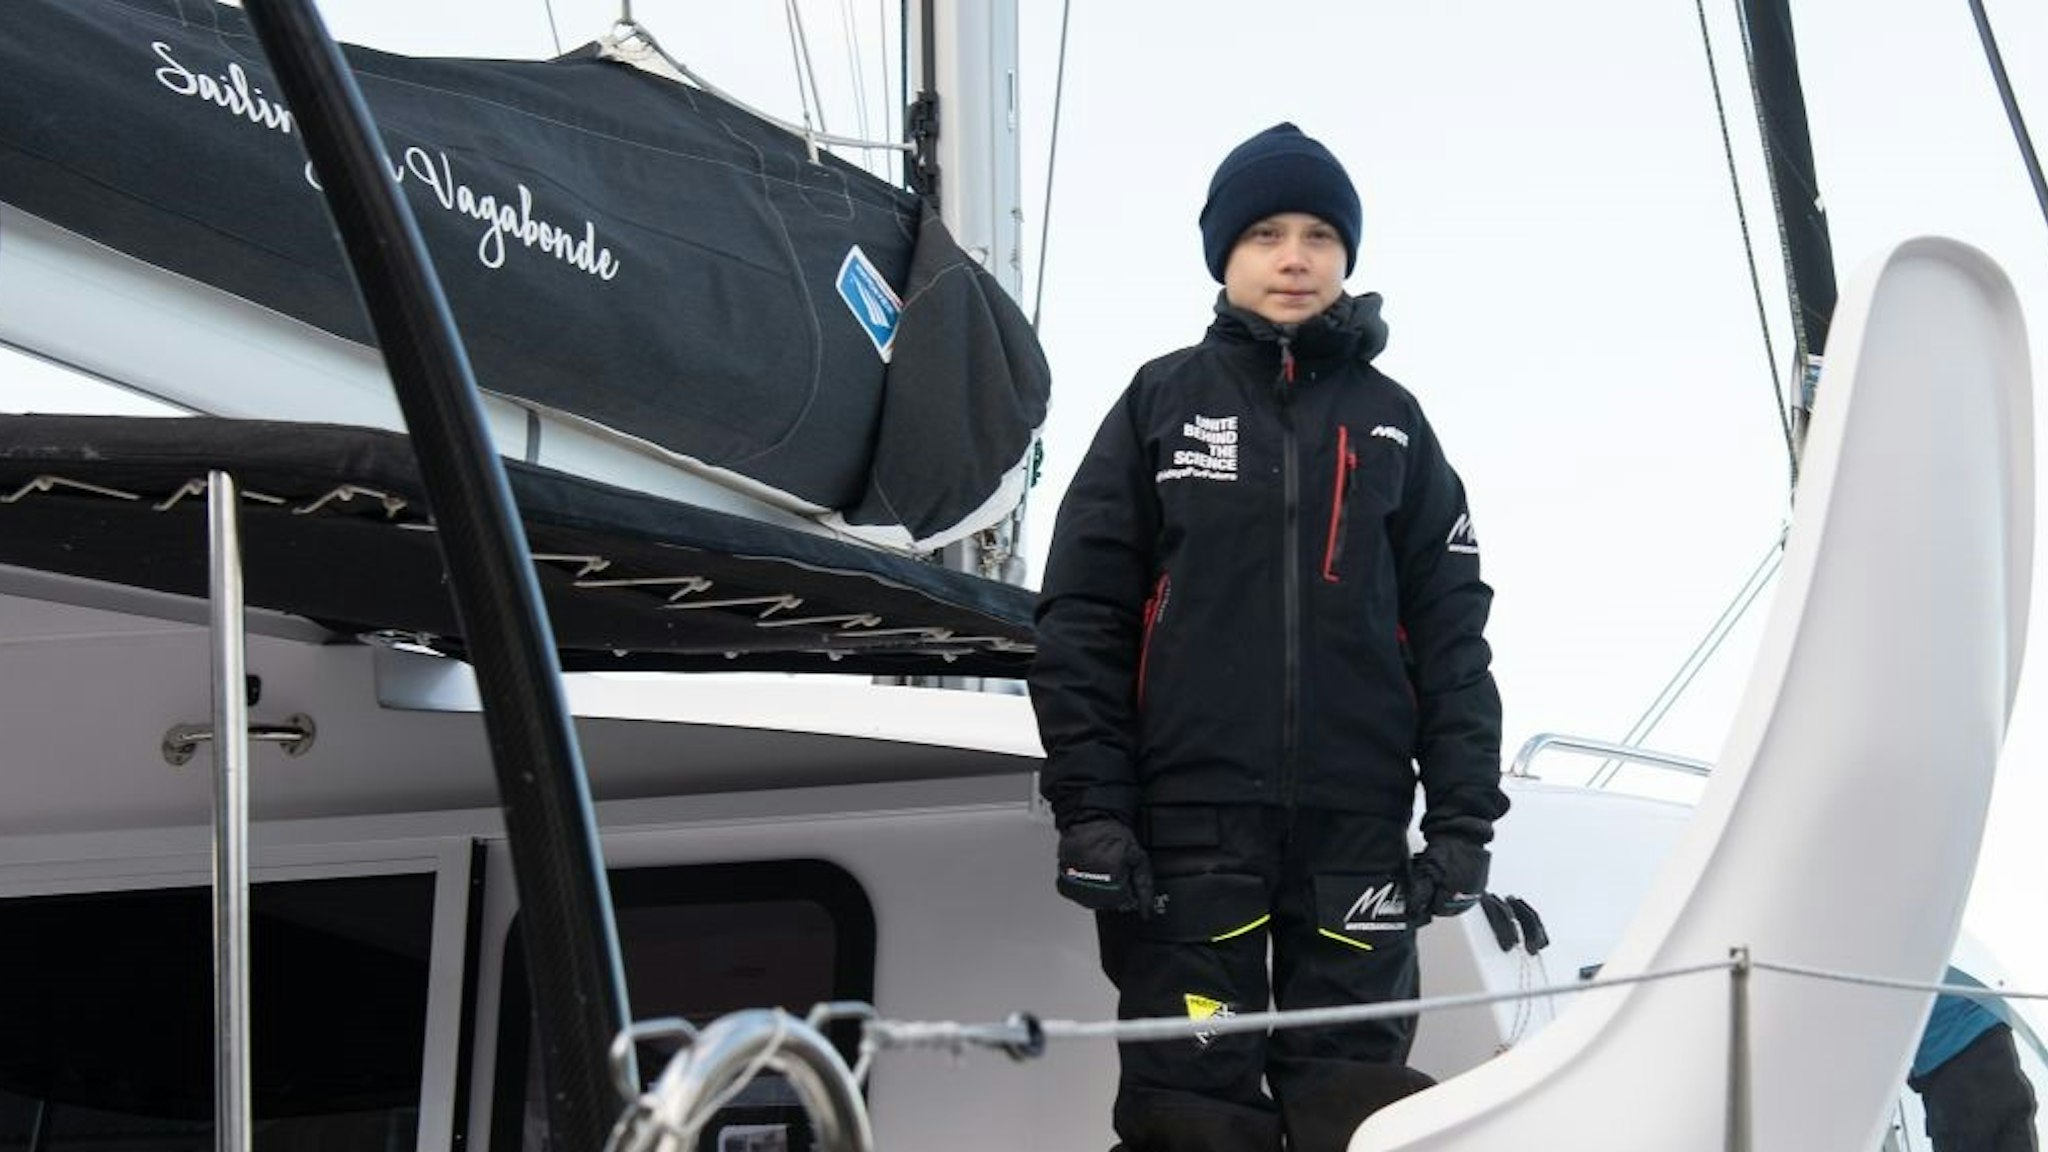 Swedish climate activist Greta Thunberg stands aboard the catamaran La Vagabonde as she sets sail to Europe in Hampton, Virginia, on November 13, 2019. - "Extremely educational" is how Greta Thunberg sums up her North American sojourn as she prepares to cross the Atlantic once more, this time bound back for Europe. The 16-year-old Swede, who became world famous for founding the "school strikes for the climate," will set sail Wednesday morning, weather permitting, after 11 hectic weeks of criss-crossing the US and Canada, making headlines at every turn.